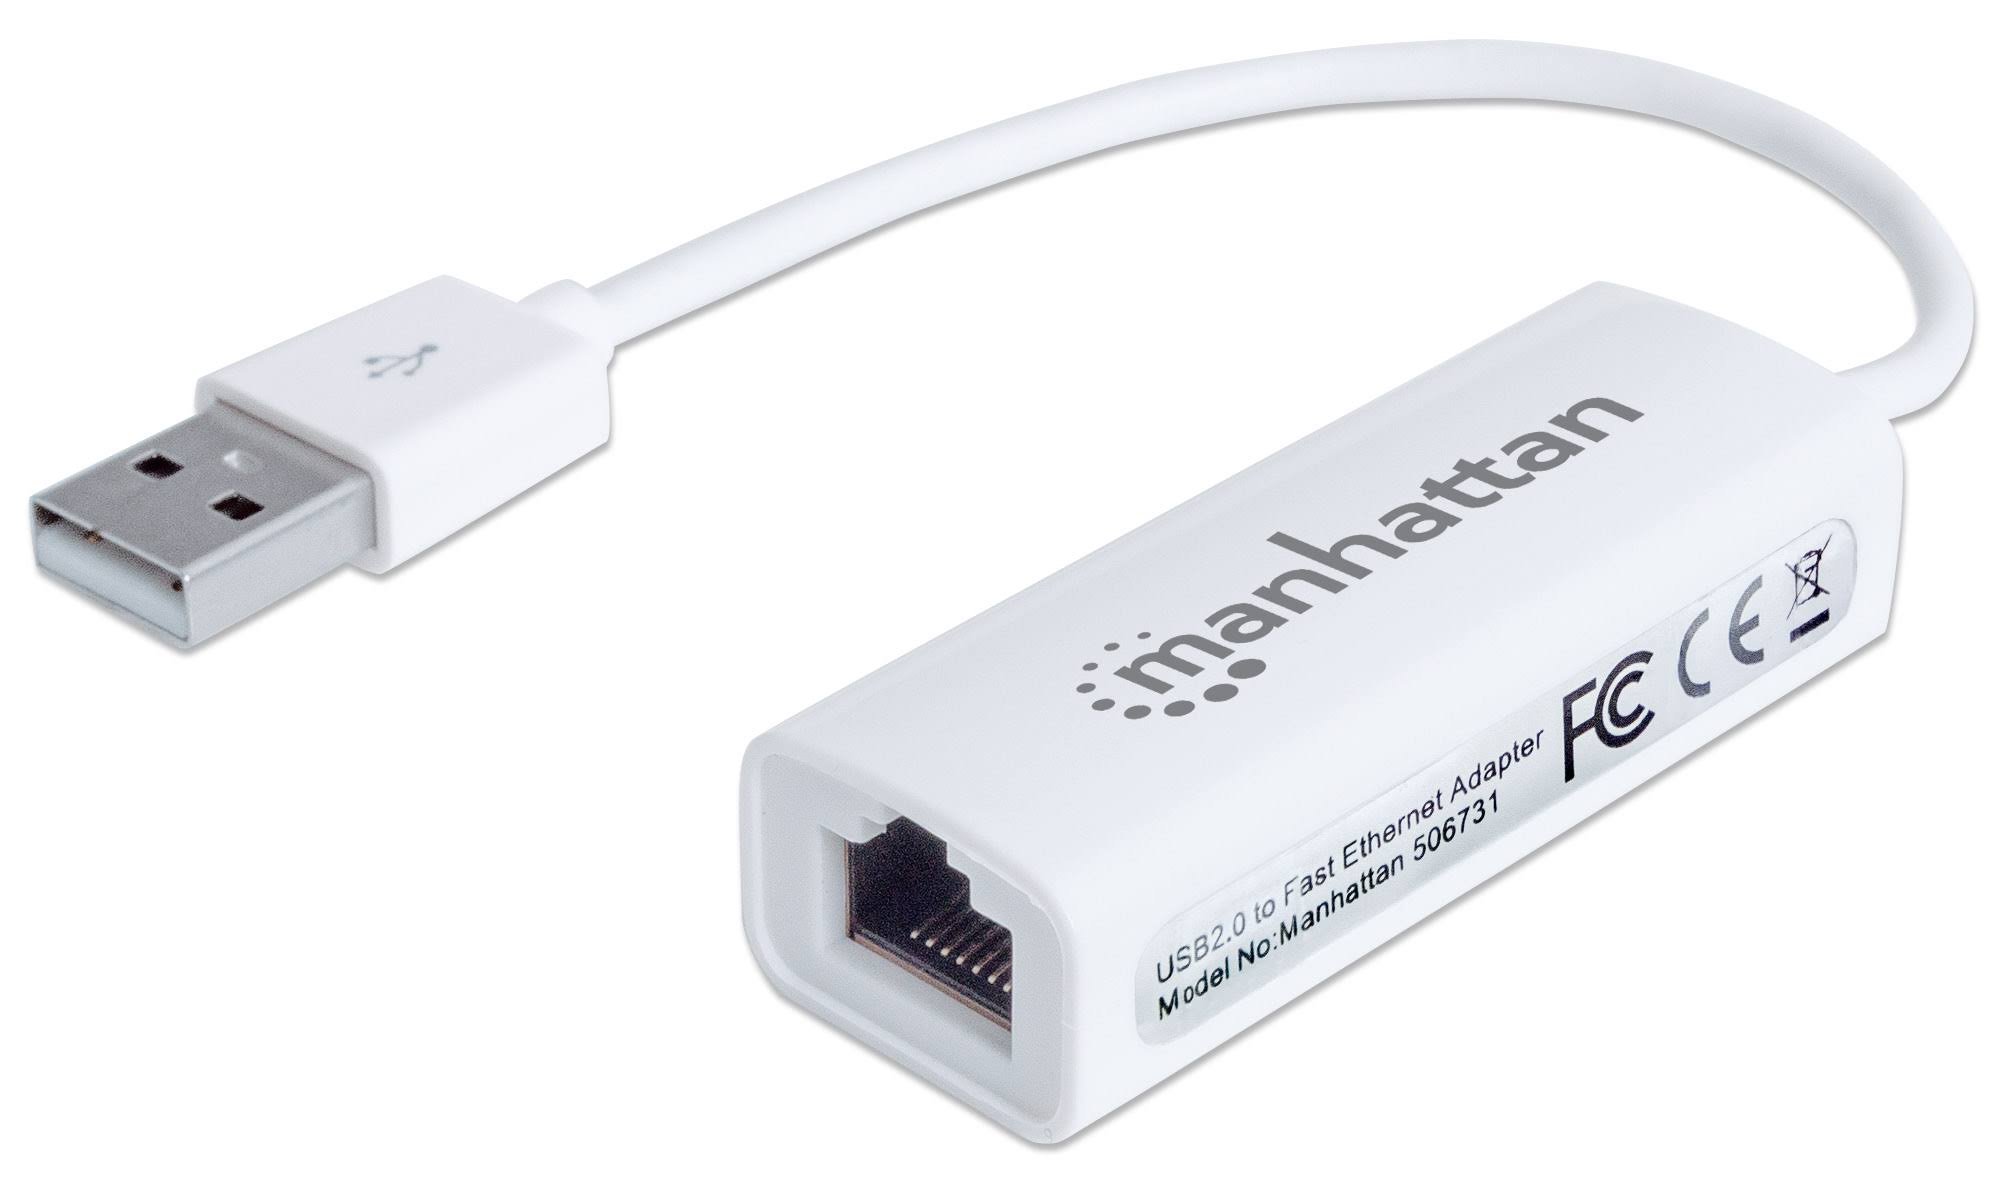 Manhattan USB 2.0 to Fast Ethernet Adapter